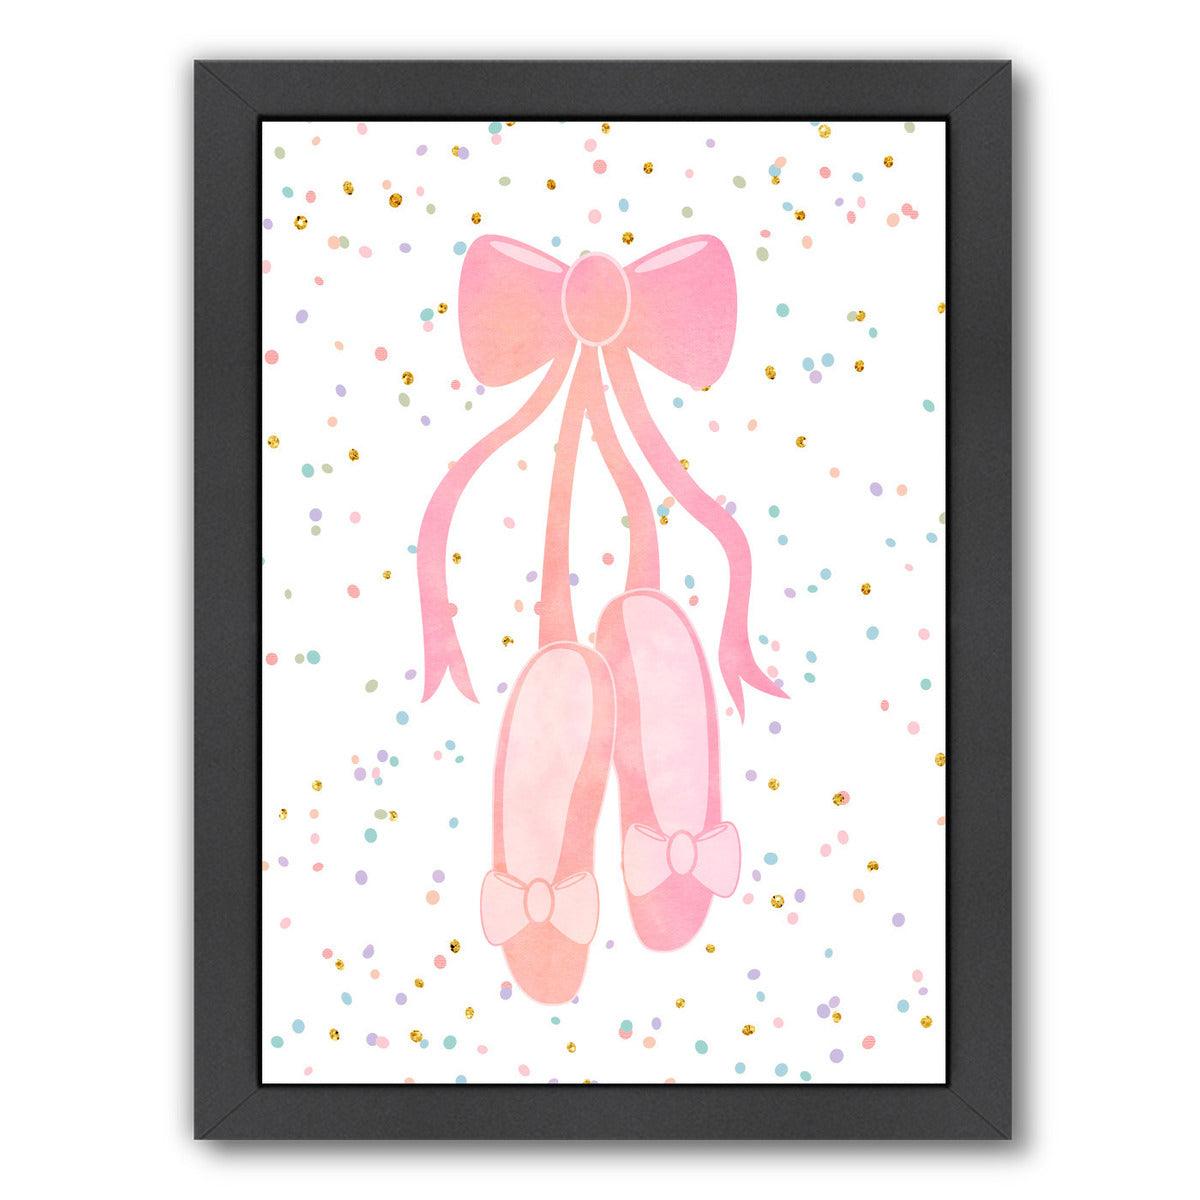 Shoes by Peach & Gold Framed Print - Americanflat